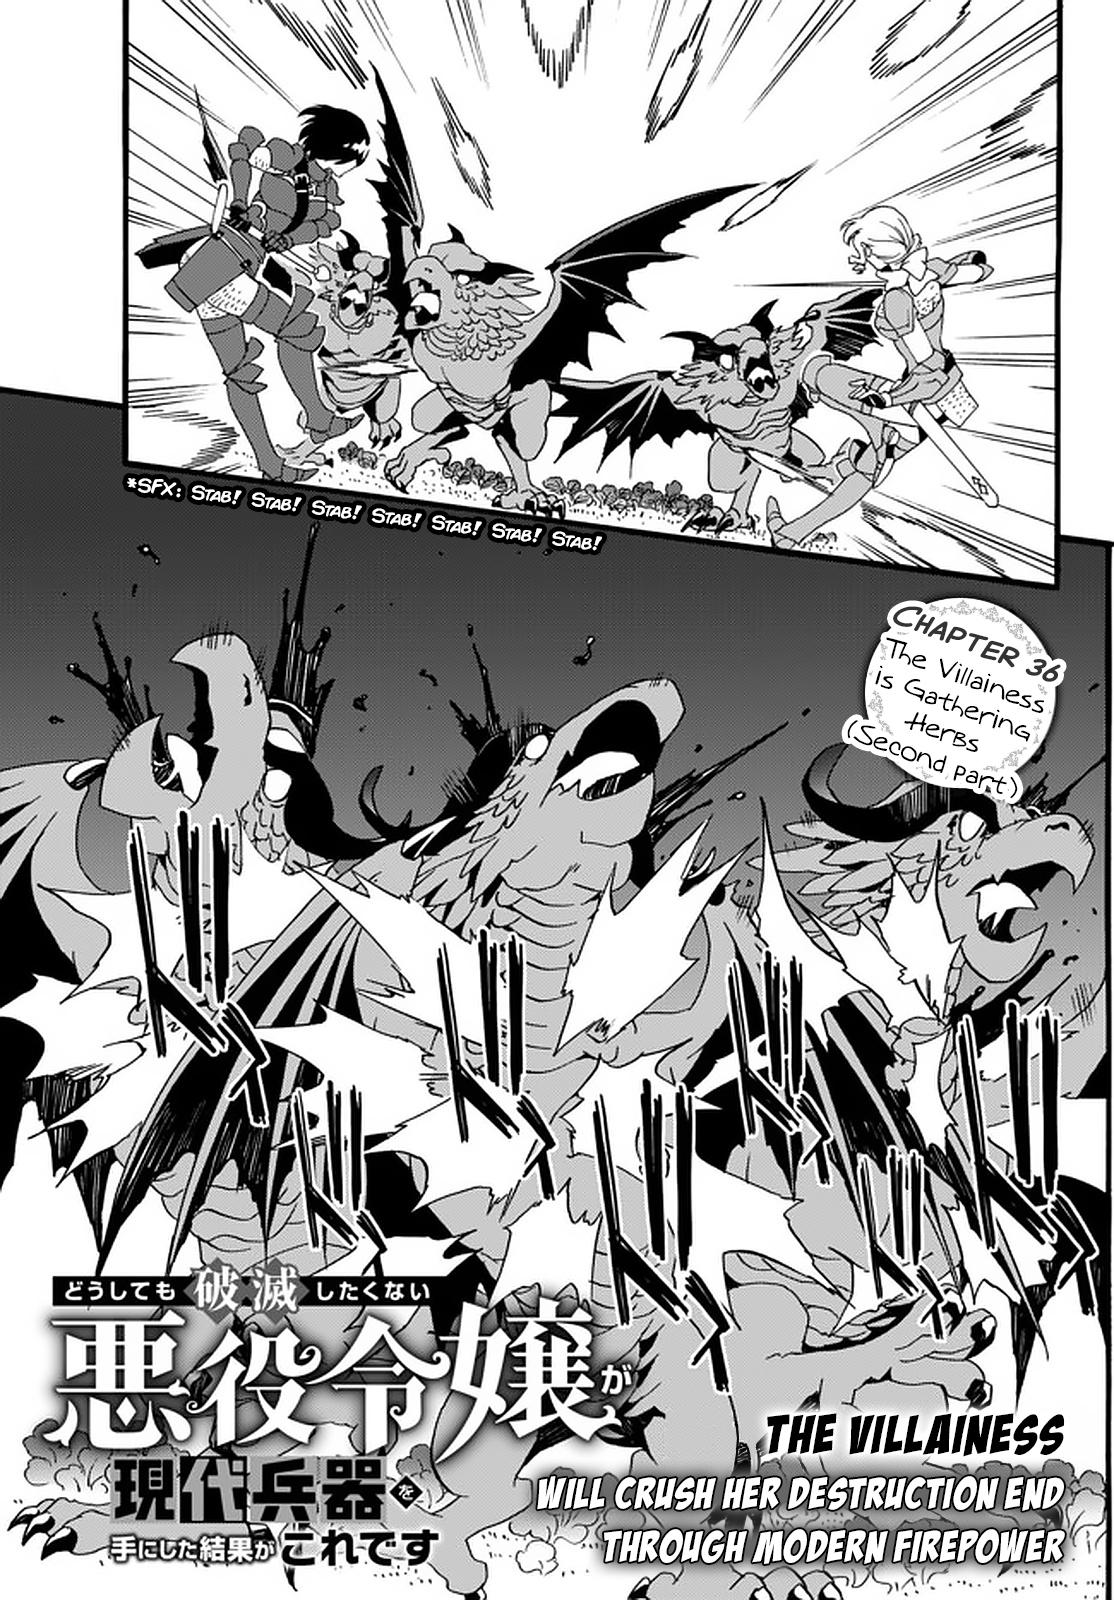 The Villainess Will Crush Her Destruction End Through Modern Firepower Vol.2 Chapter 36: The Villainess Is Gathering Herbs (Second Part) - Picture 1